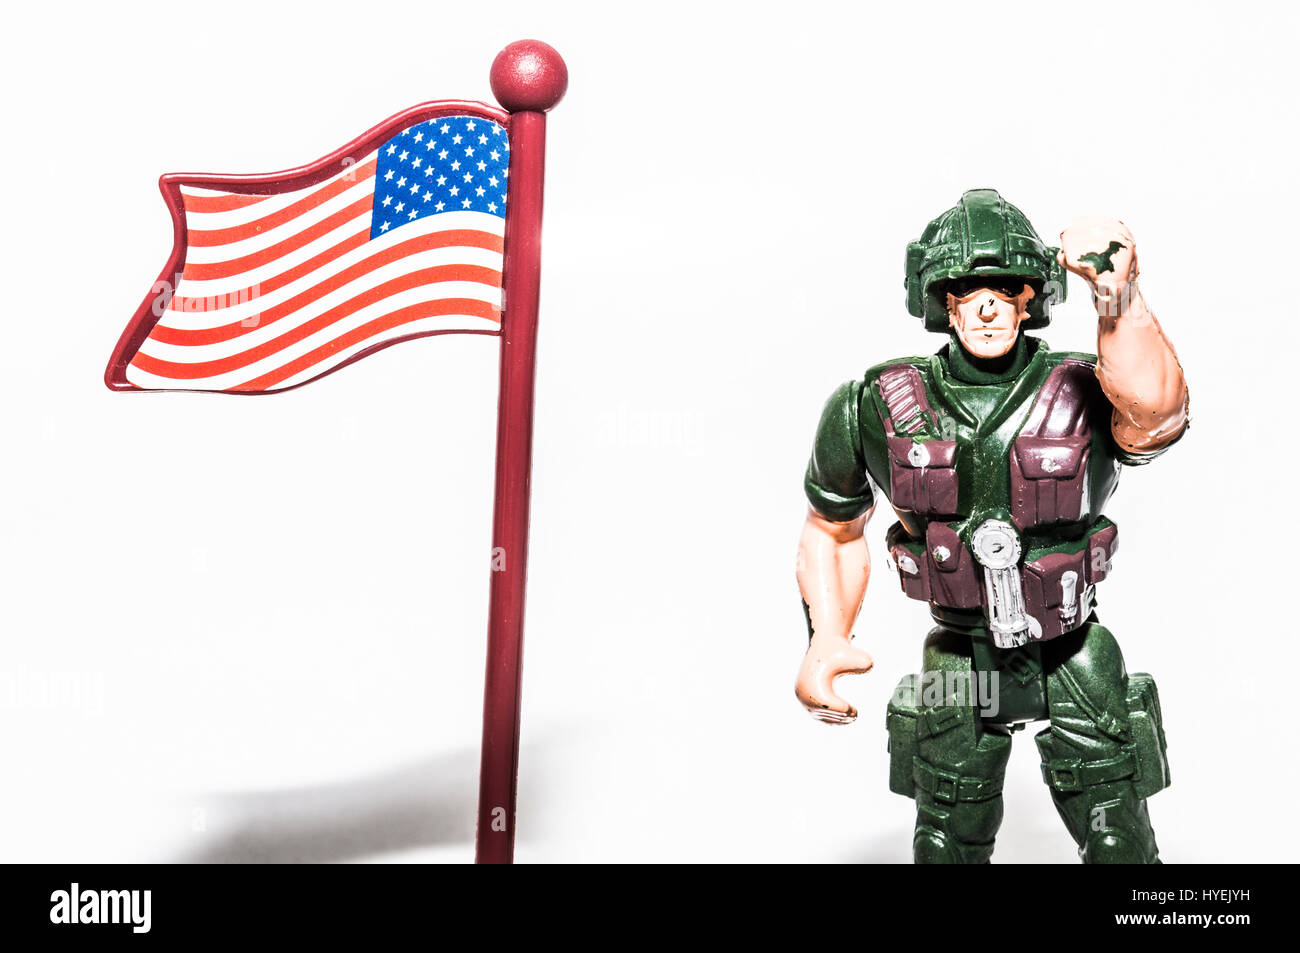 Toy soldier saluting the American flag Stock Photo